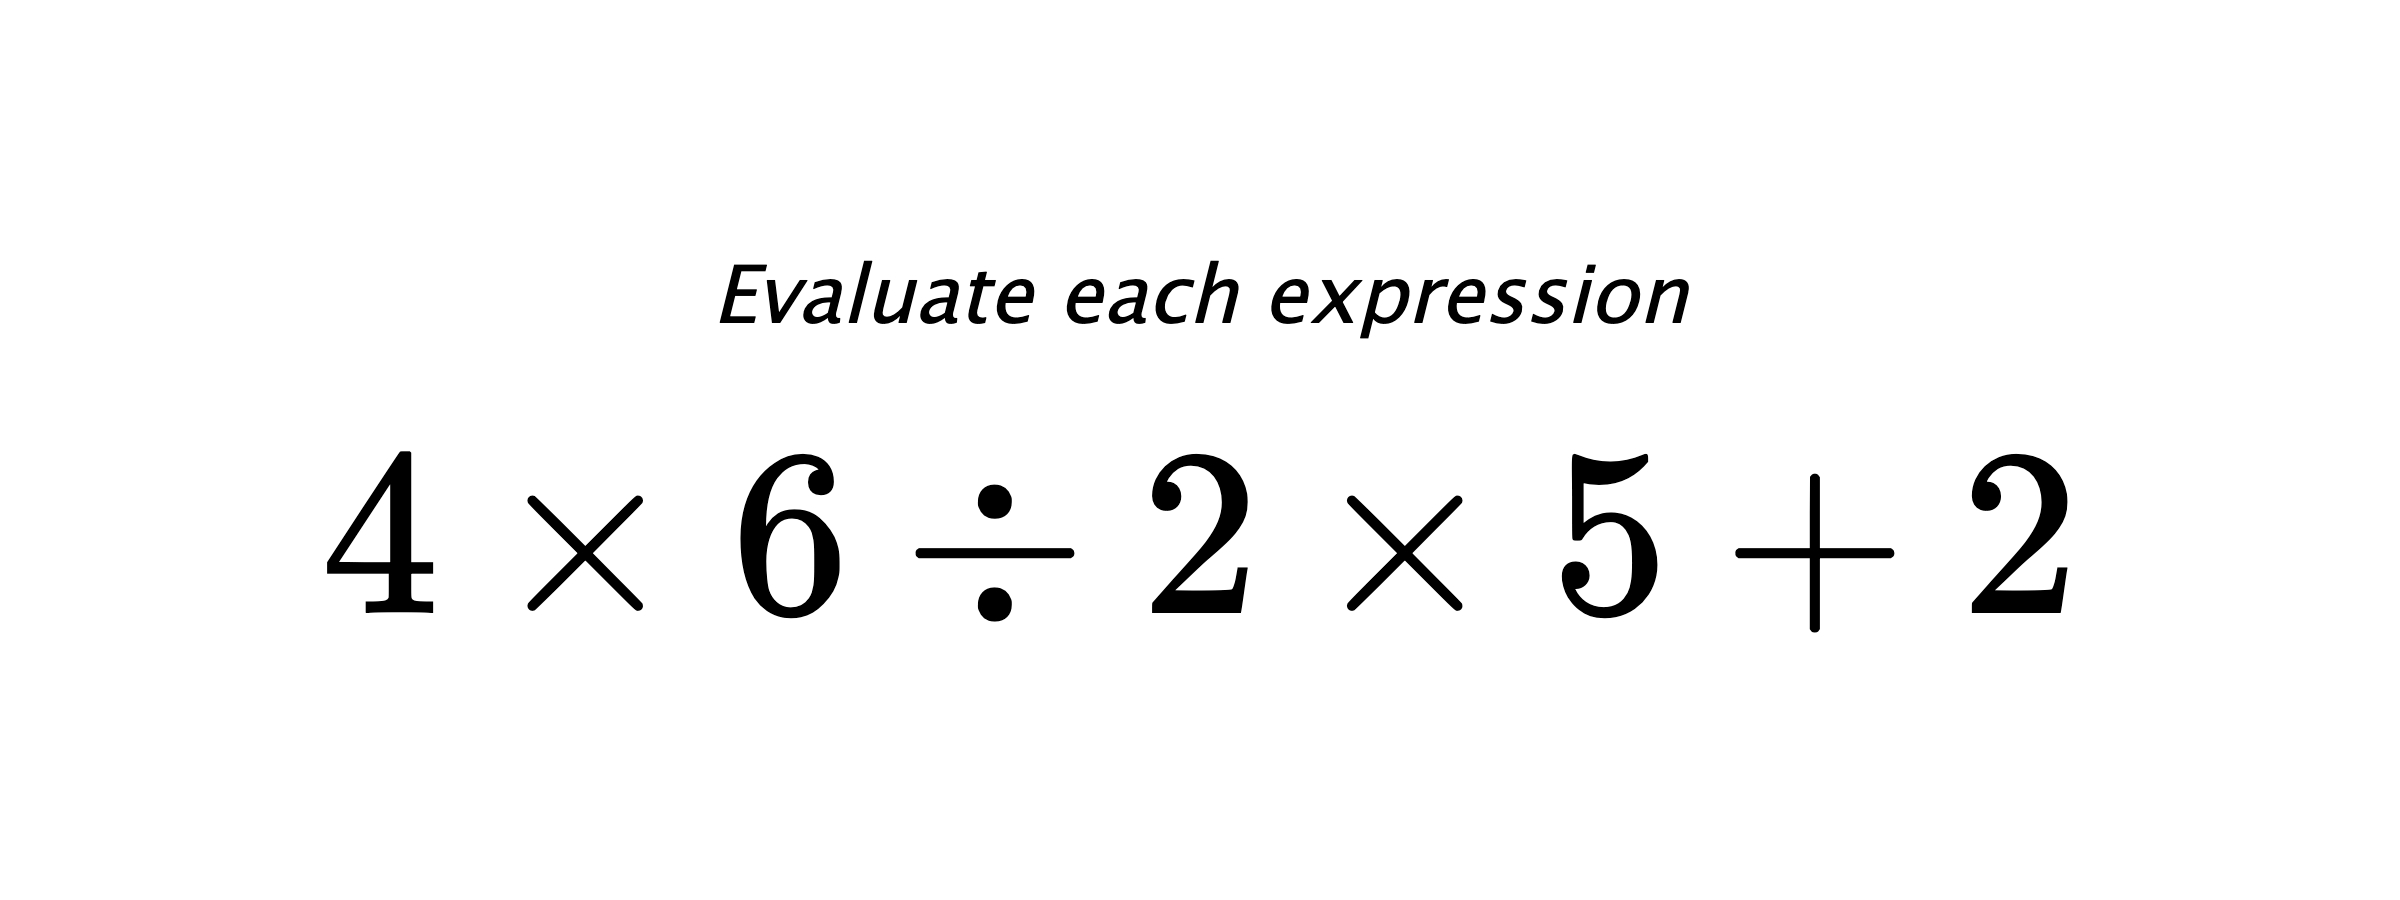 Evaluate each expression $ 4 \times 6 \div 2 \times 5 + 2 $